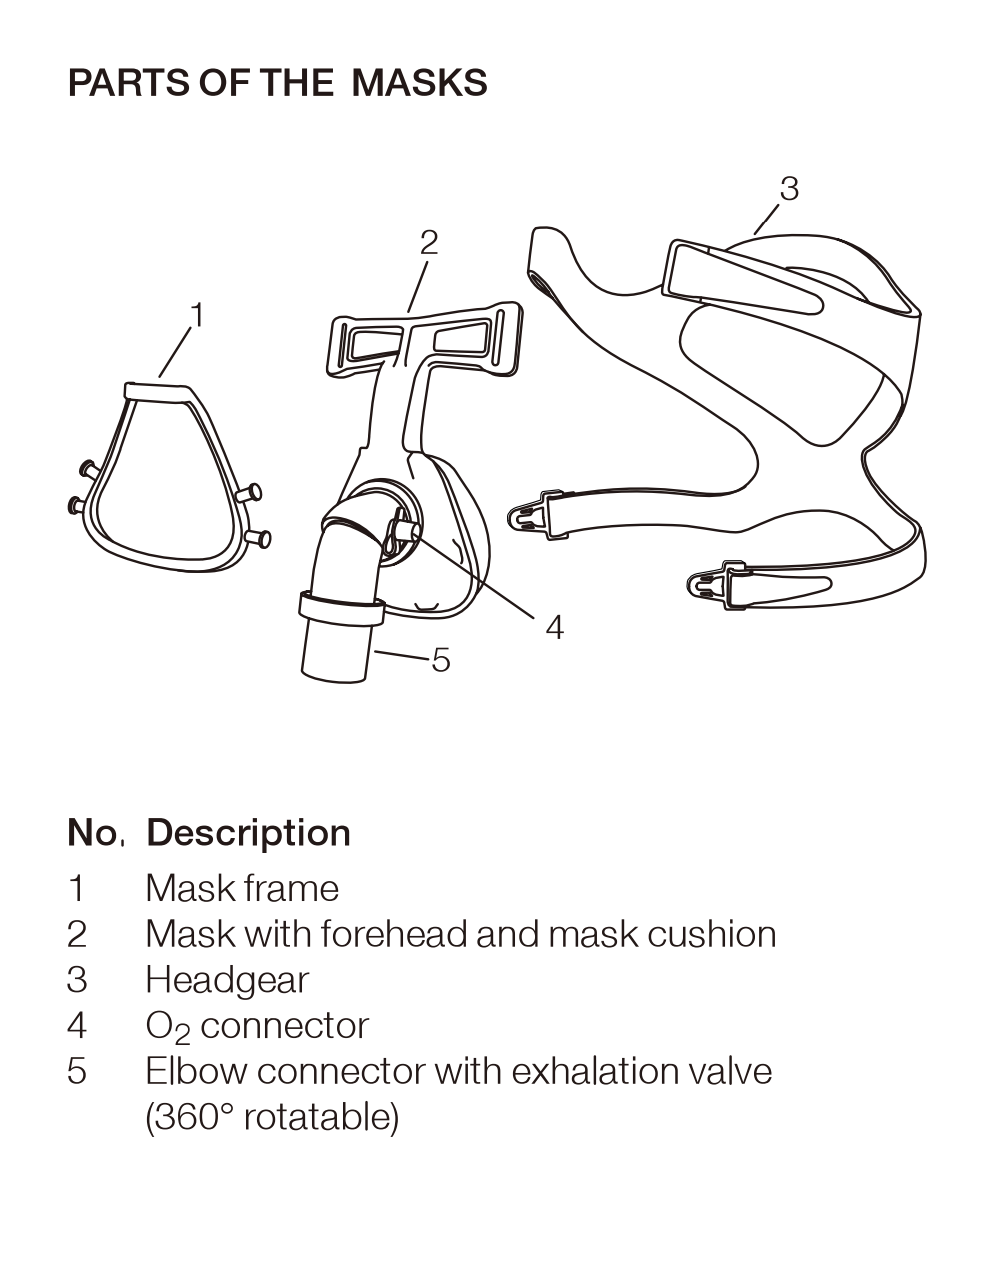 Hoffrichter Standard Nasal Mask - incl. headband and mask cushion, available in S, M or L 